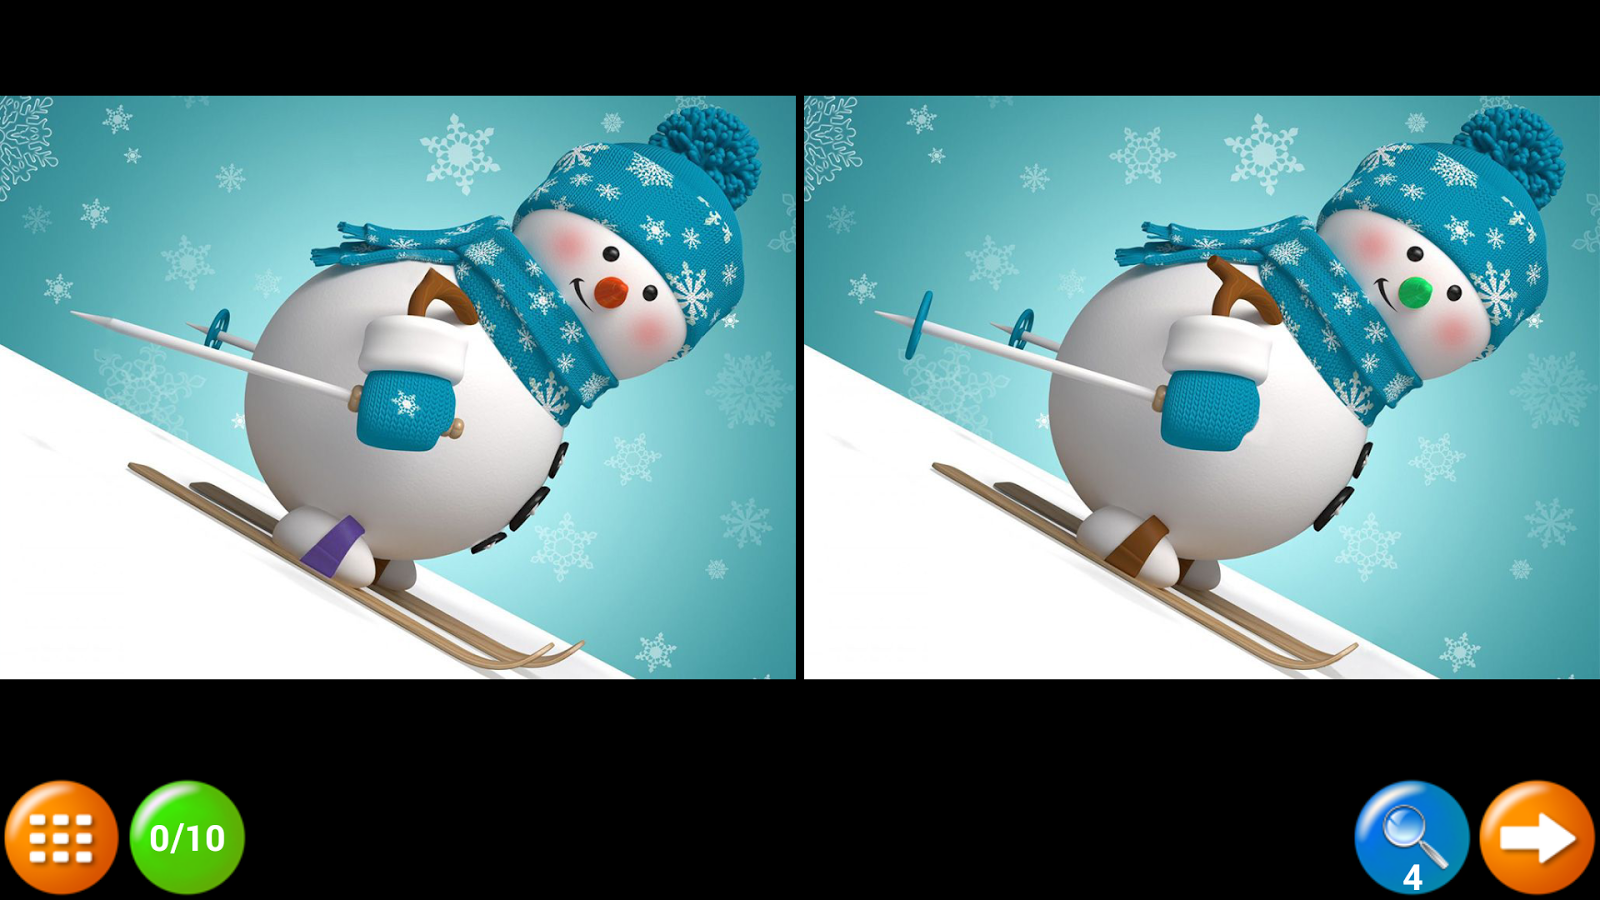 Find Differences New Year 2015 - Android Apps on Google Play